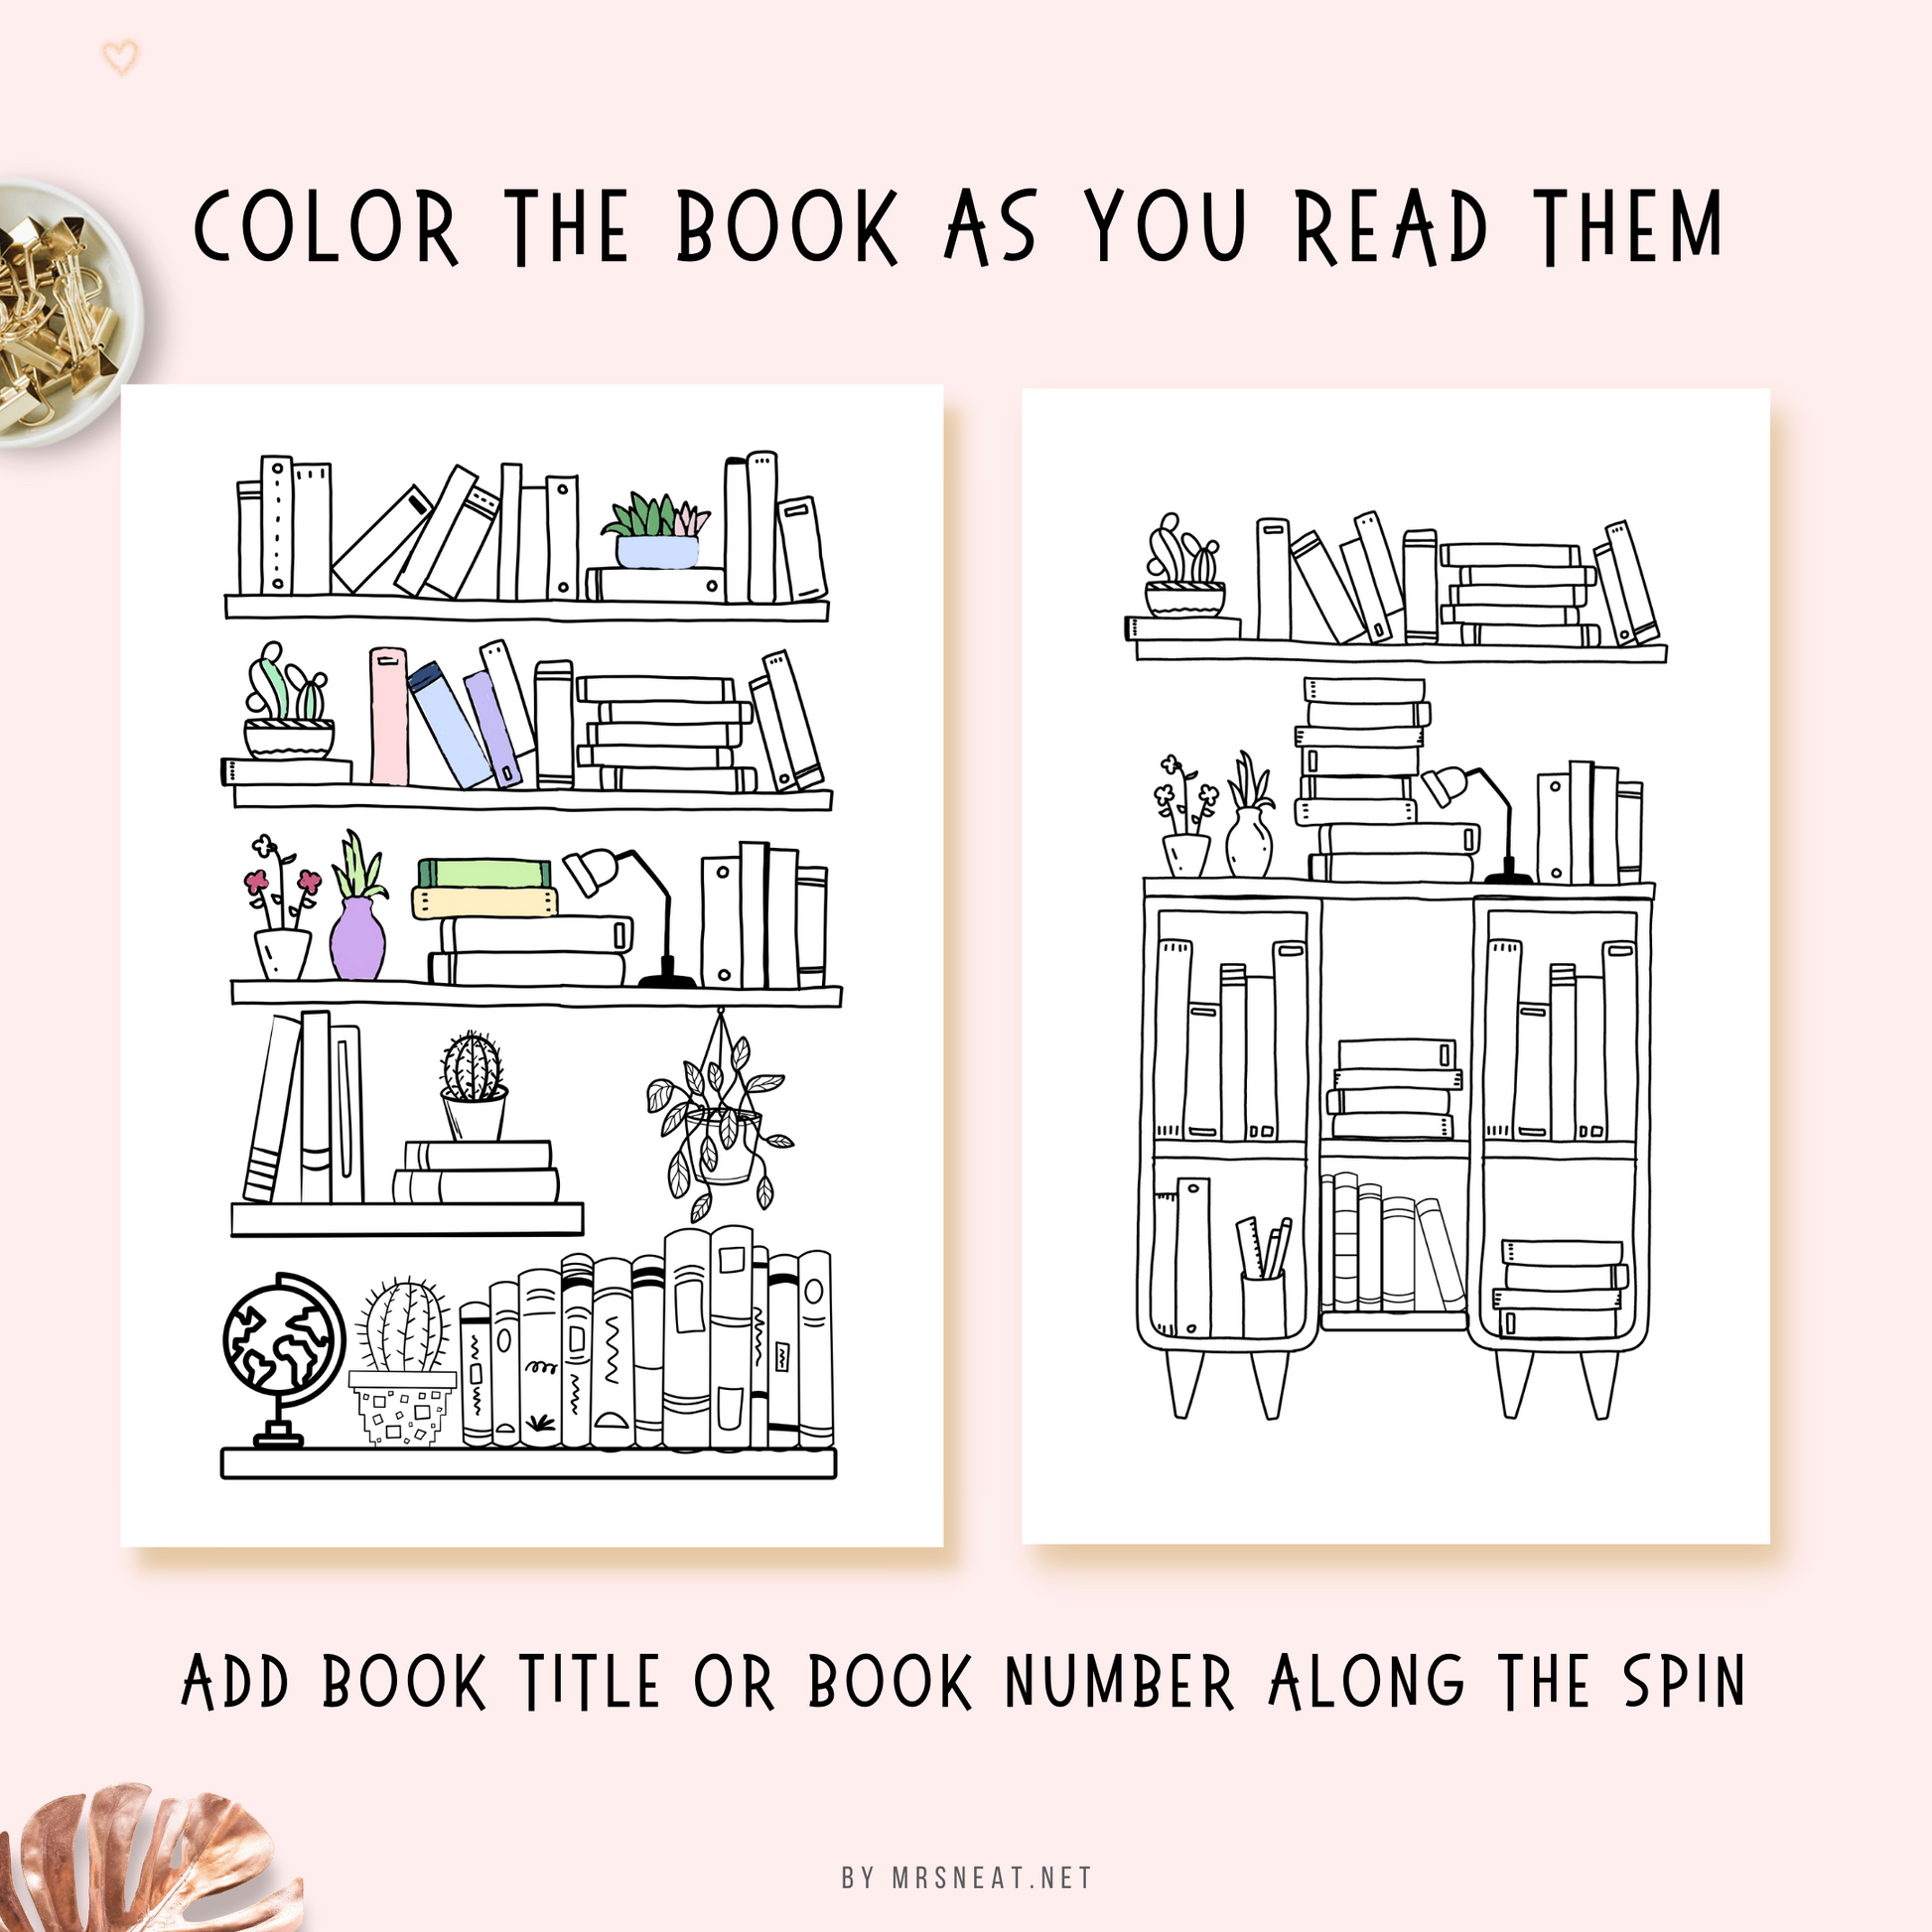 Beautiful and adorable Bookshelf picture on 2 versions with color along the book spin